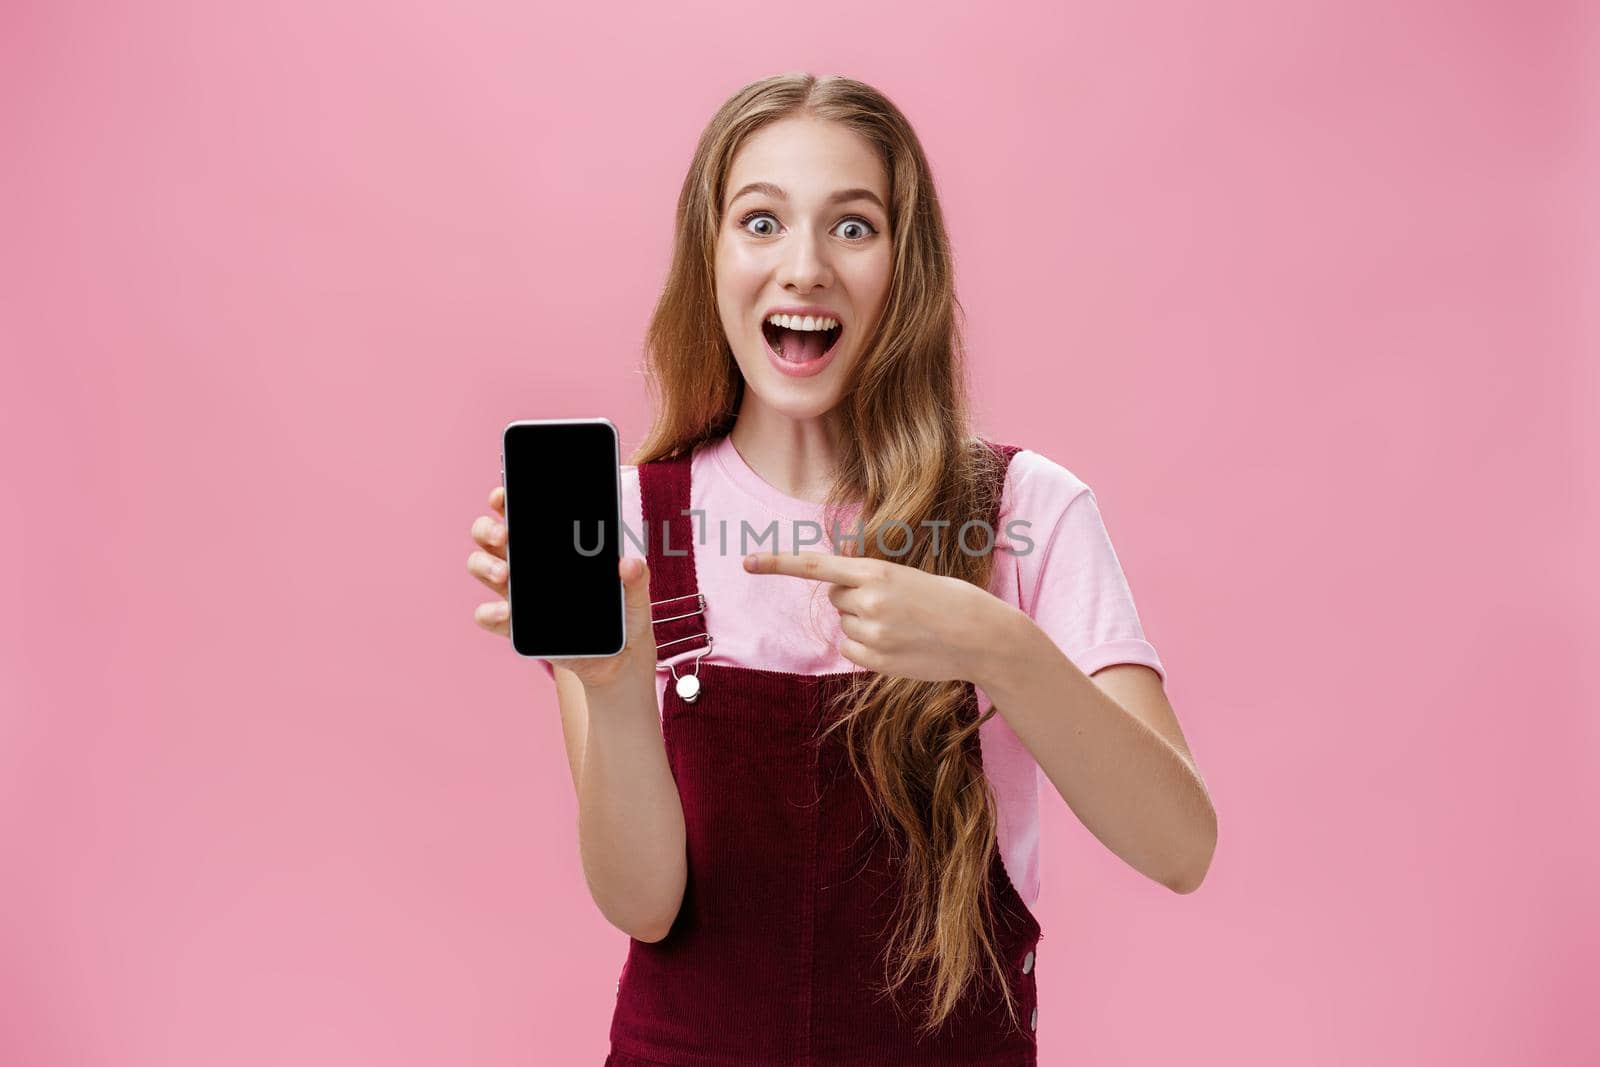 Excited and thrilled young teenage girl in overalls and t-shirt smiling amazed full of happiness pointing at smartphone screen staring enthusiastic at camera describing awesome cellphone features. Technology concept